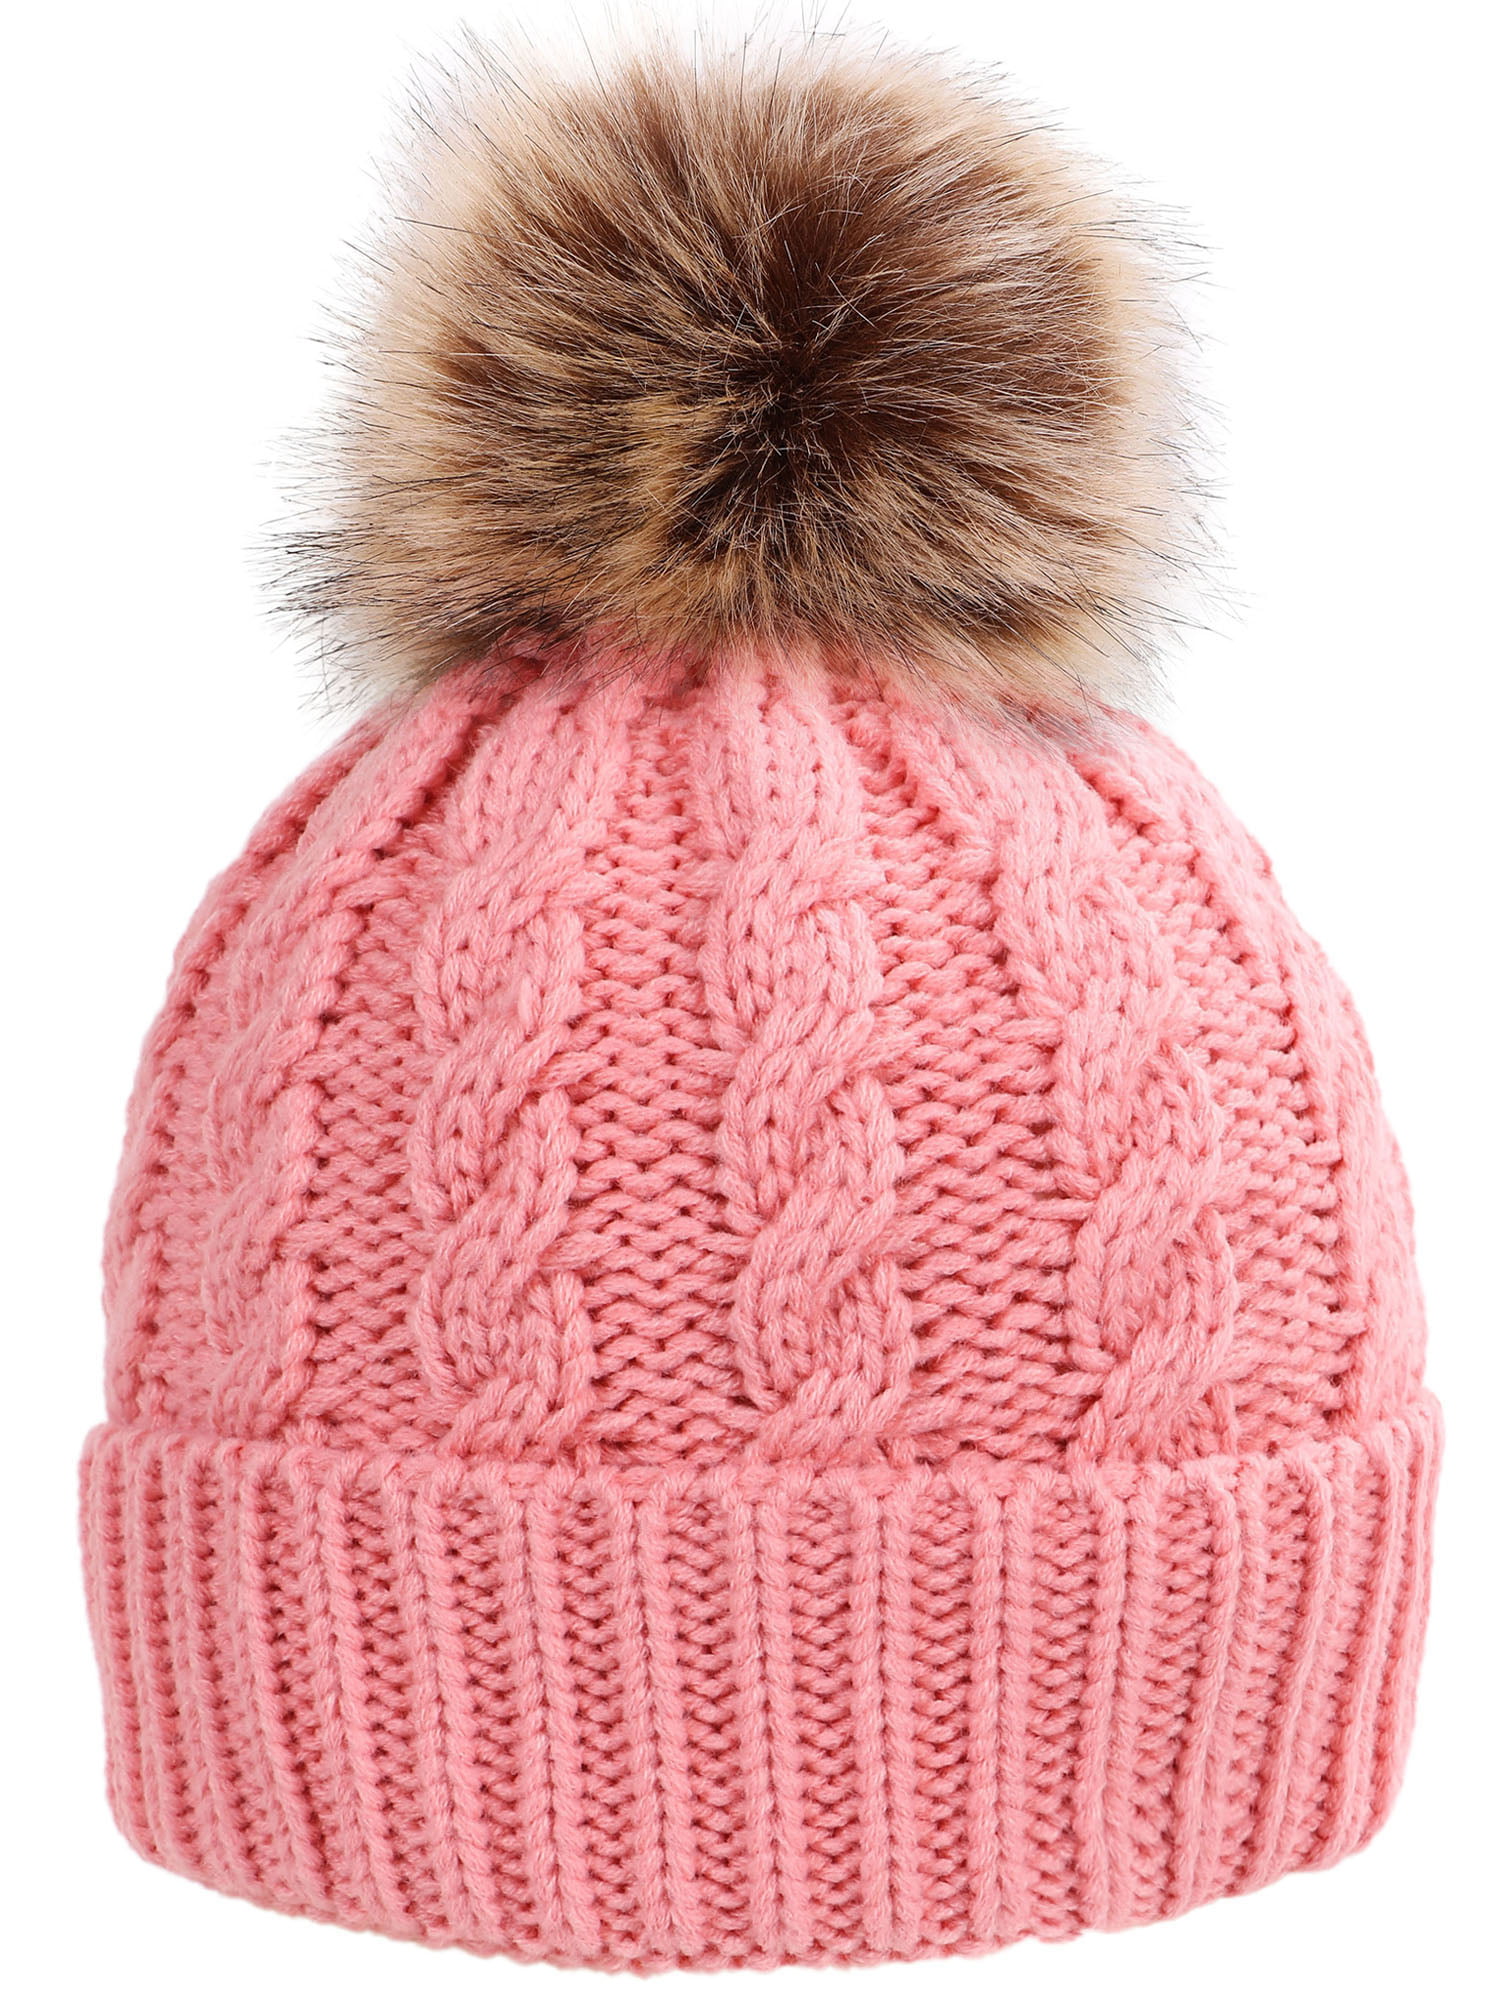 Baby Boy Girl Peachy Pink or Blue Fur Lined Chunky Knit Pom-Pom Hat LARGE FIT 